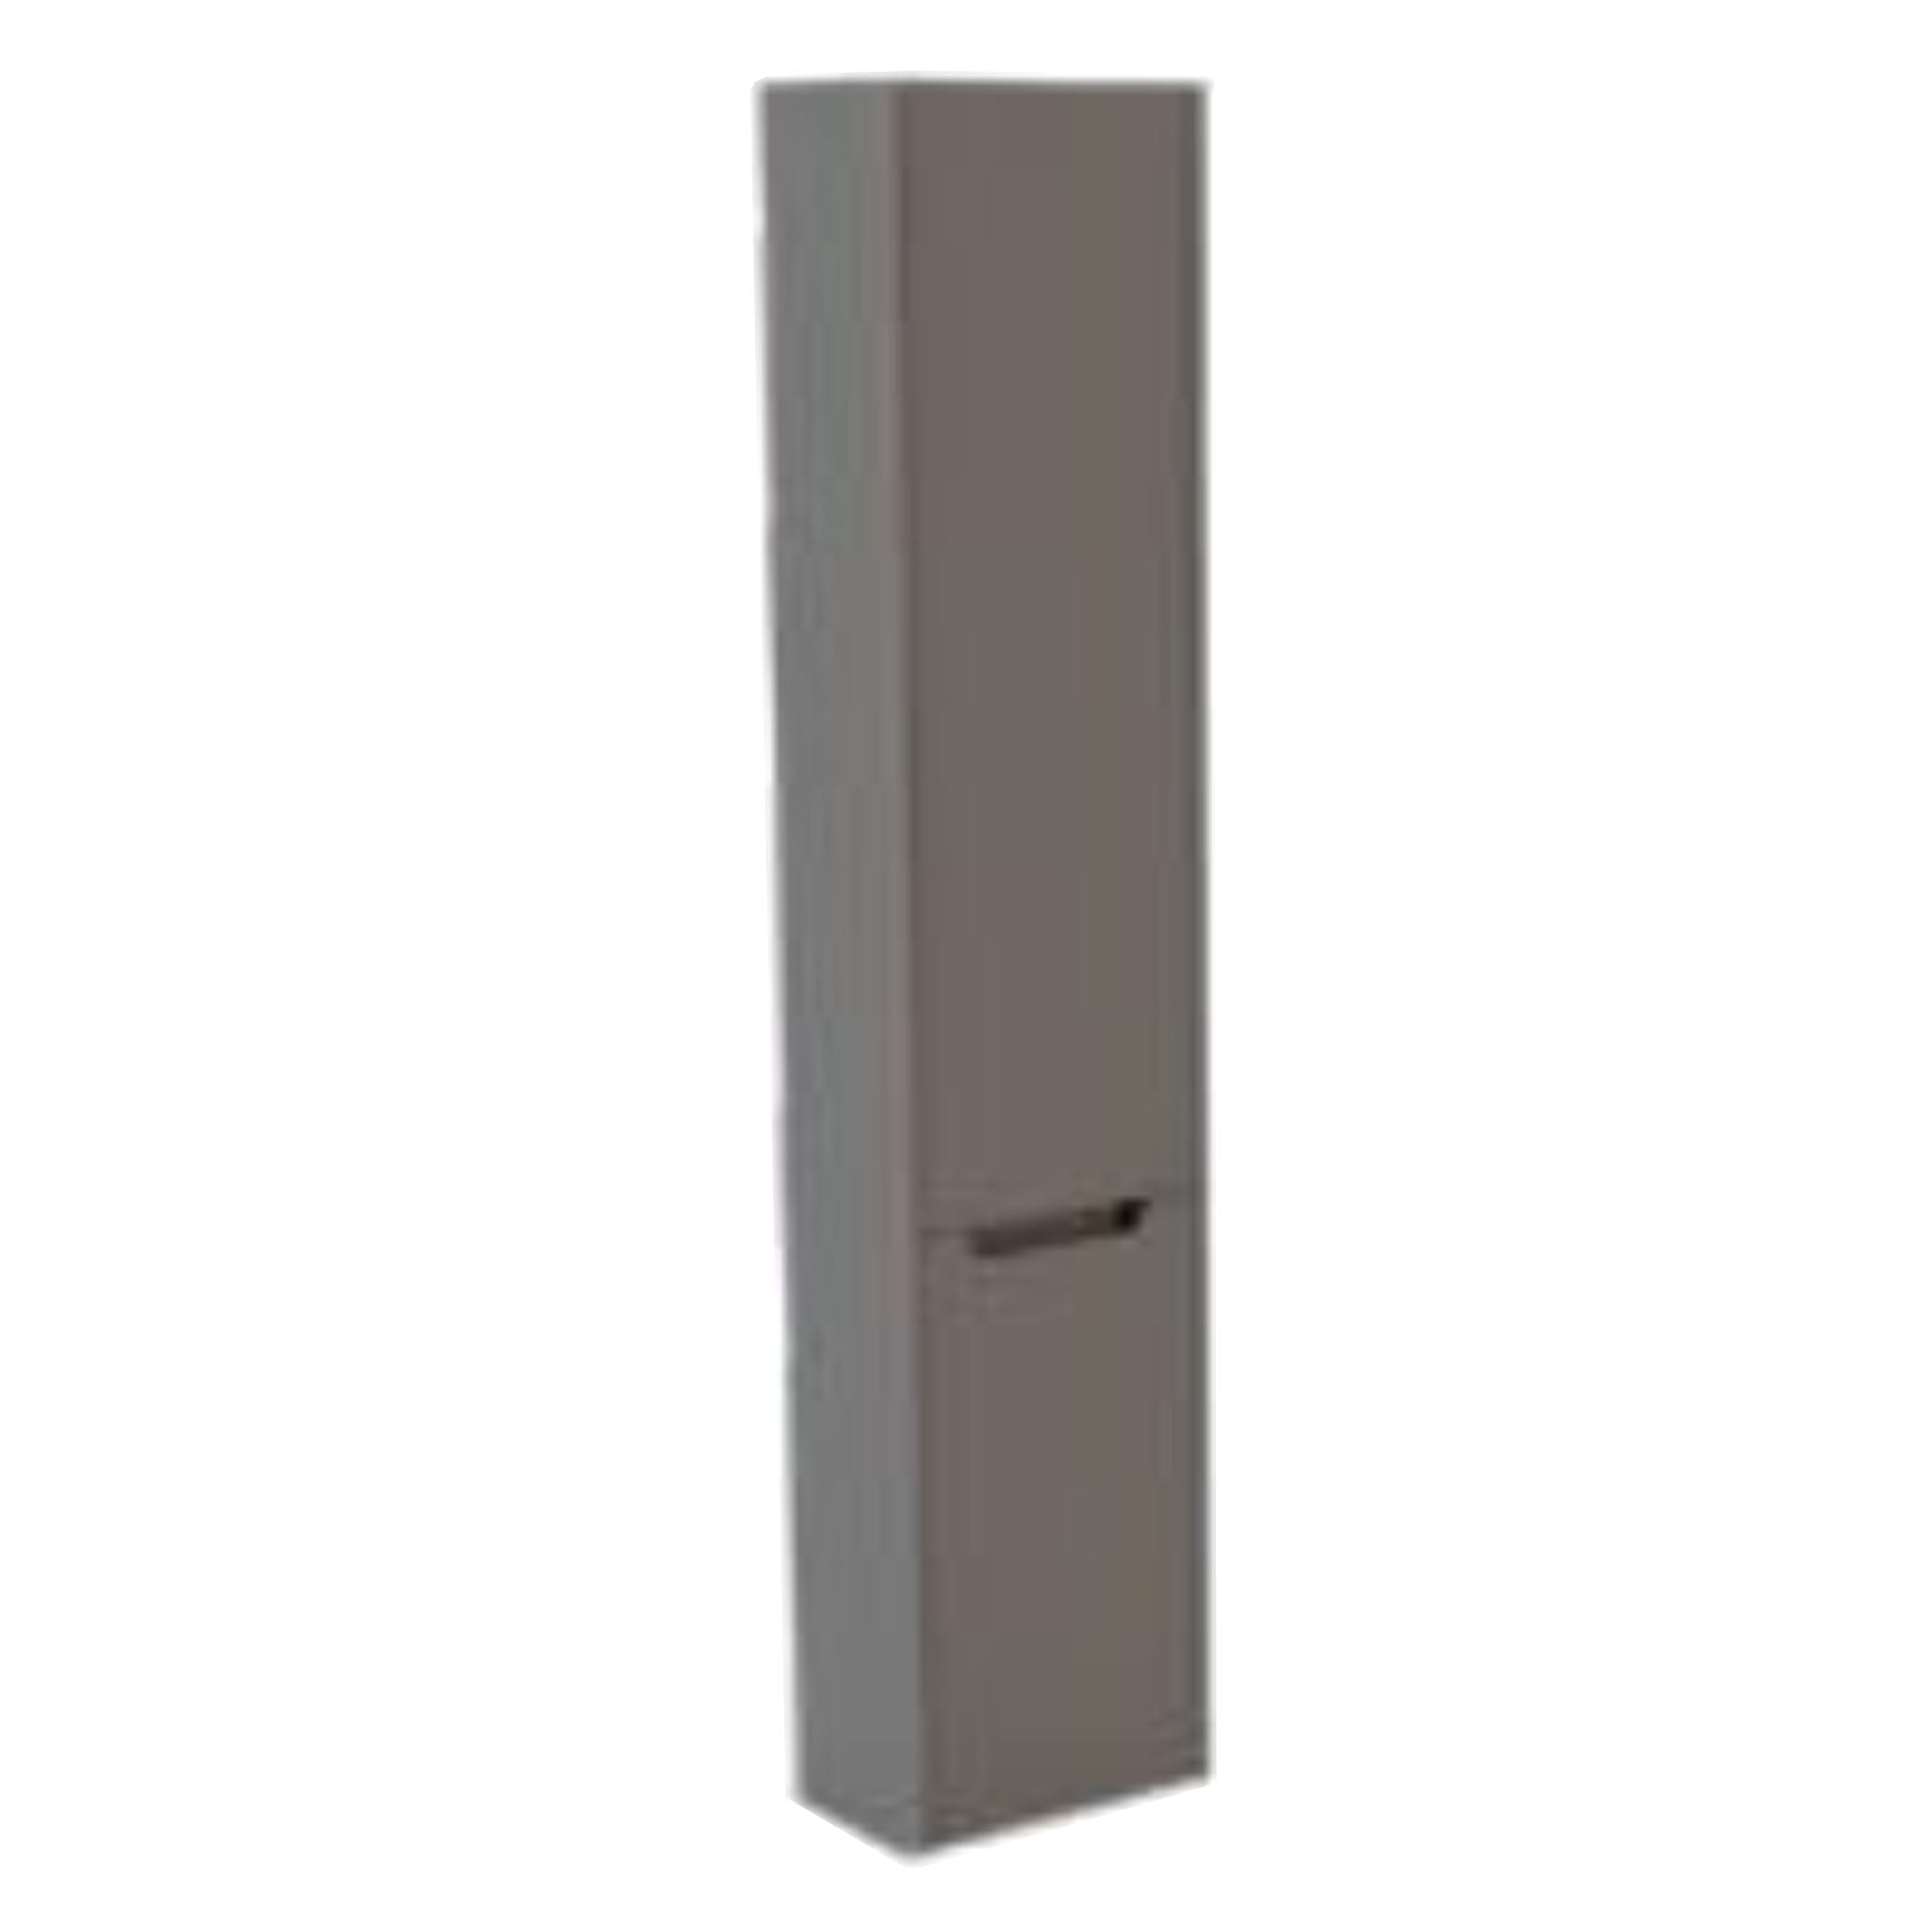 GSI Pura Tall Unit For Curved Range